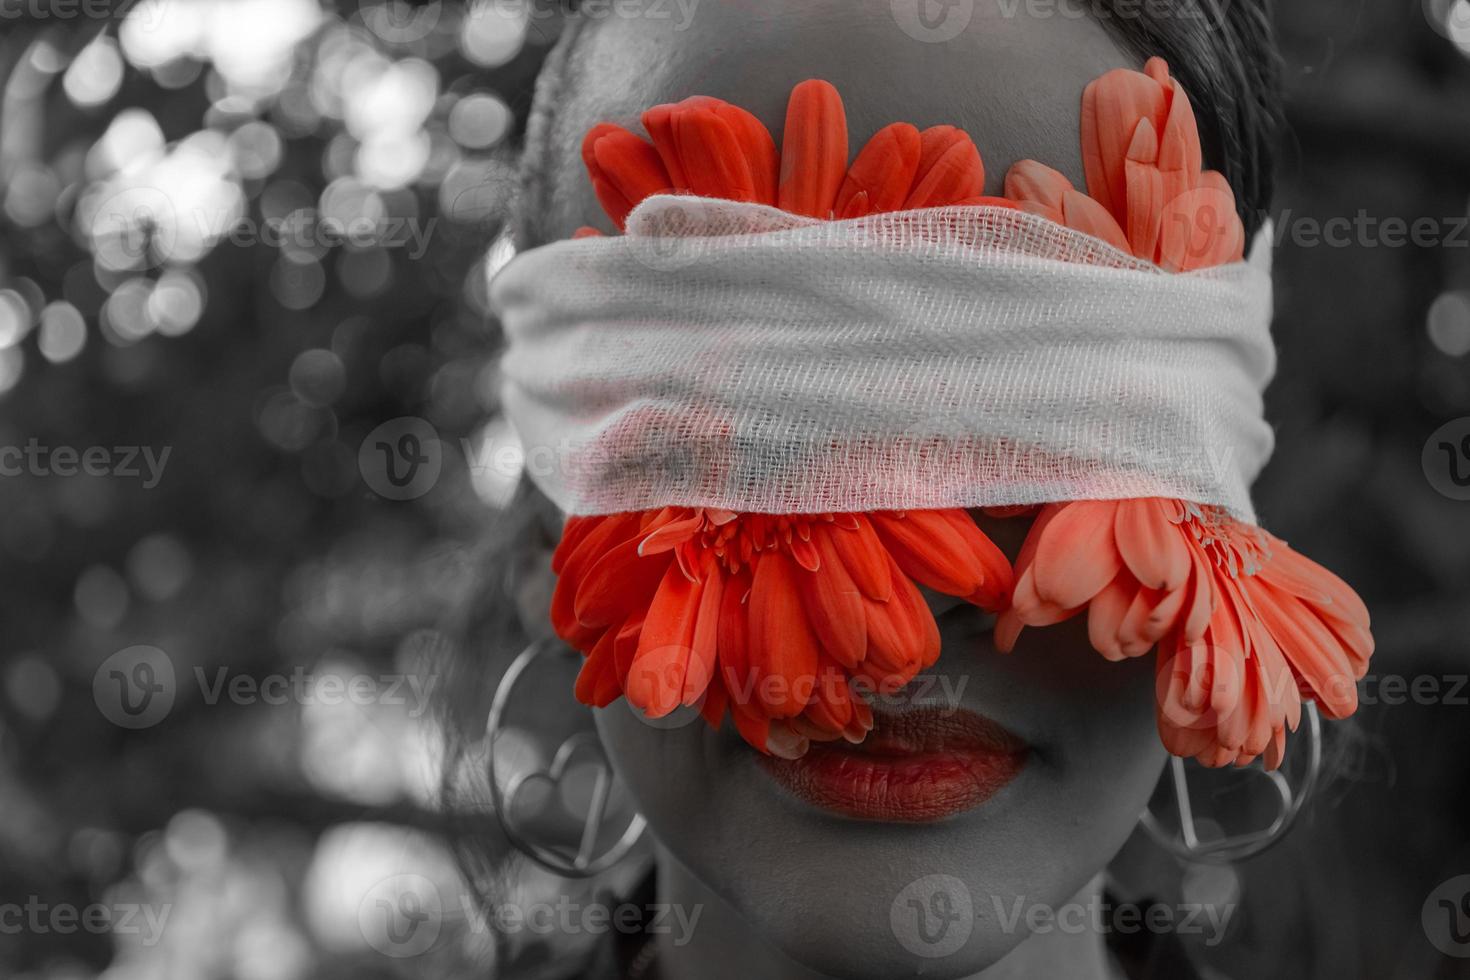 Woman with red flowers bandaged to her eyes photo